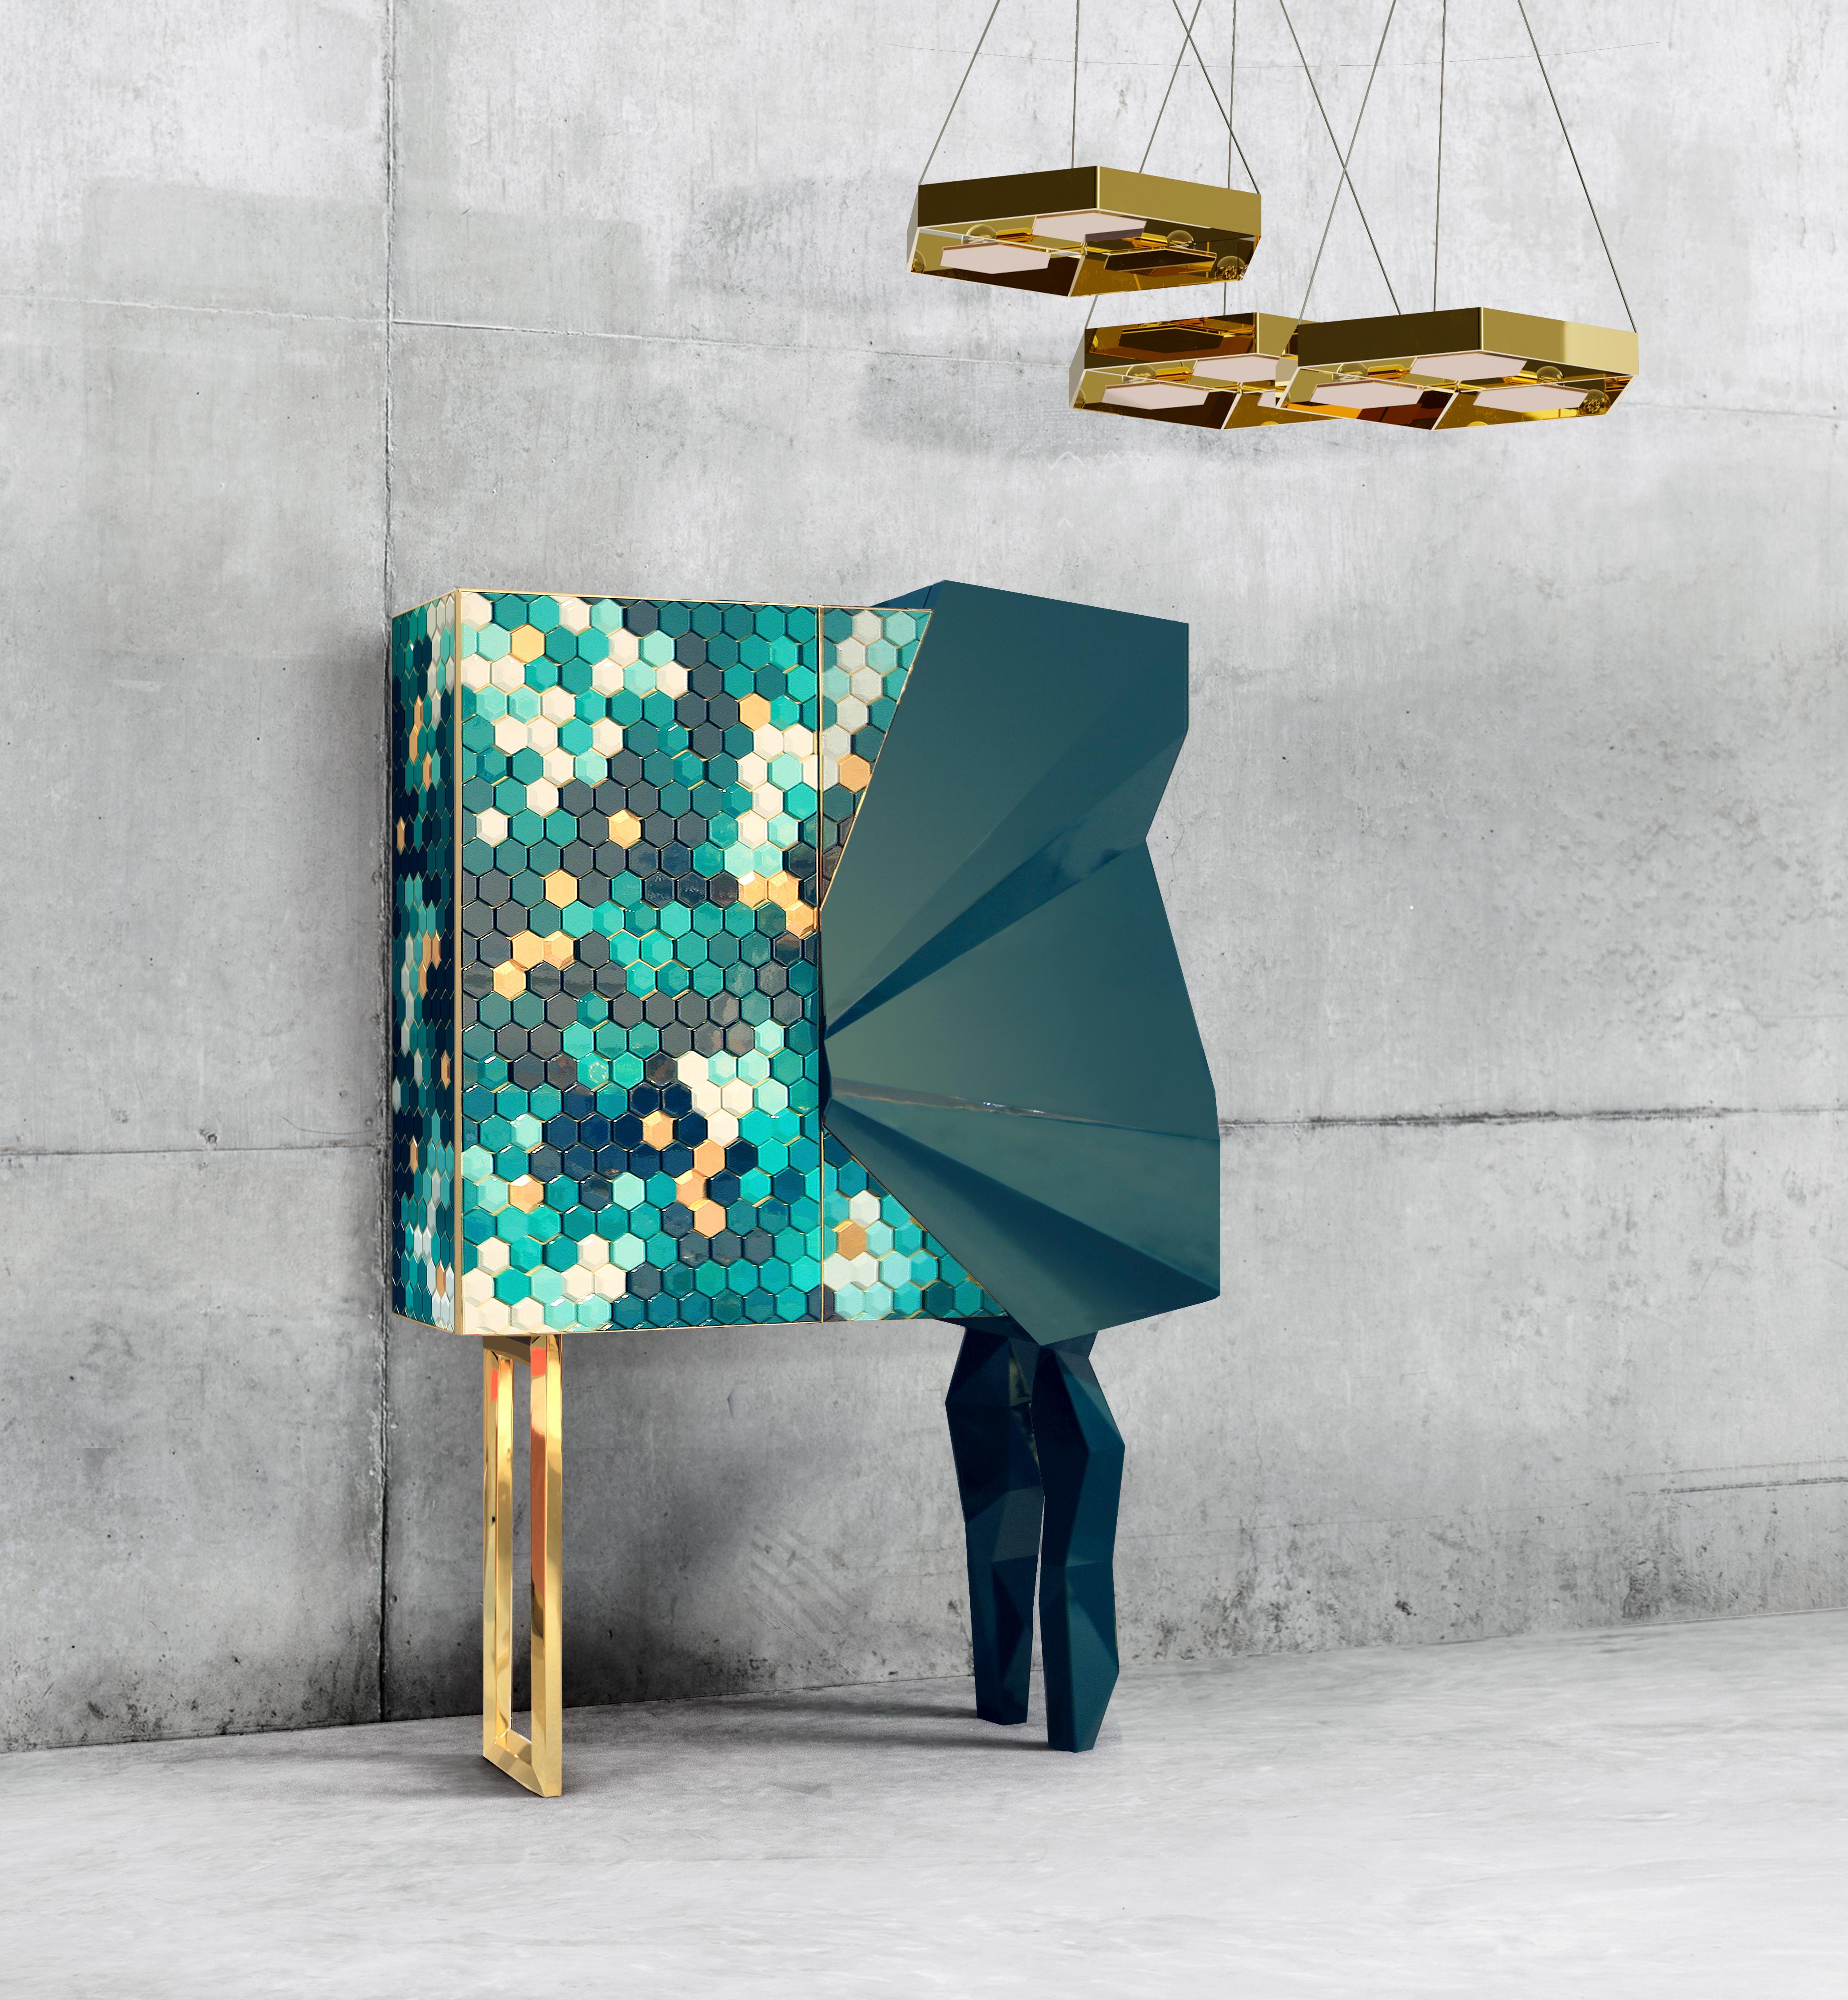 Honeycomb Emerald cabinet, Royal Stranger
Dimensions: 185 x 126 x 60 cm
Materials: Black pearl color combination with gold leaf and stainless steel coated in brass.

Inspired by one of the most intrinsic forms of nature, this sideboard